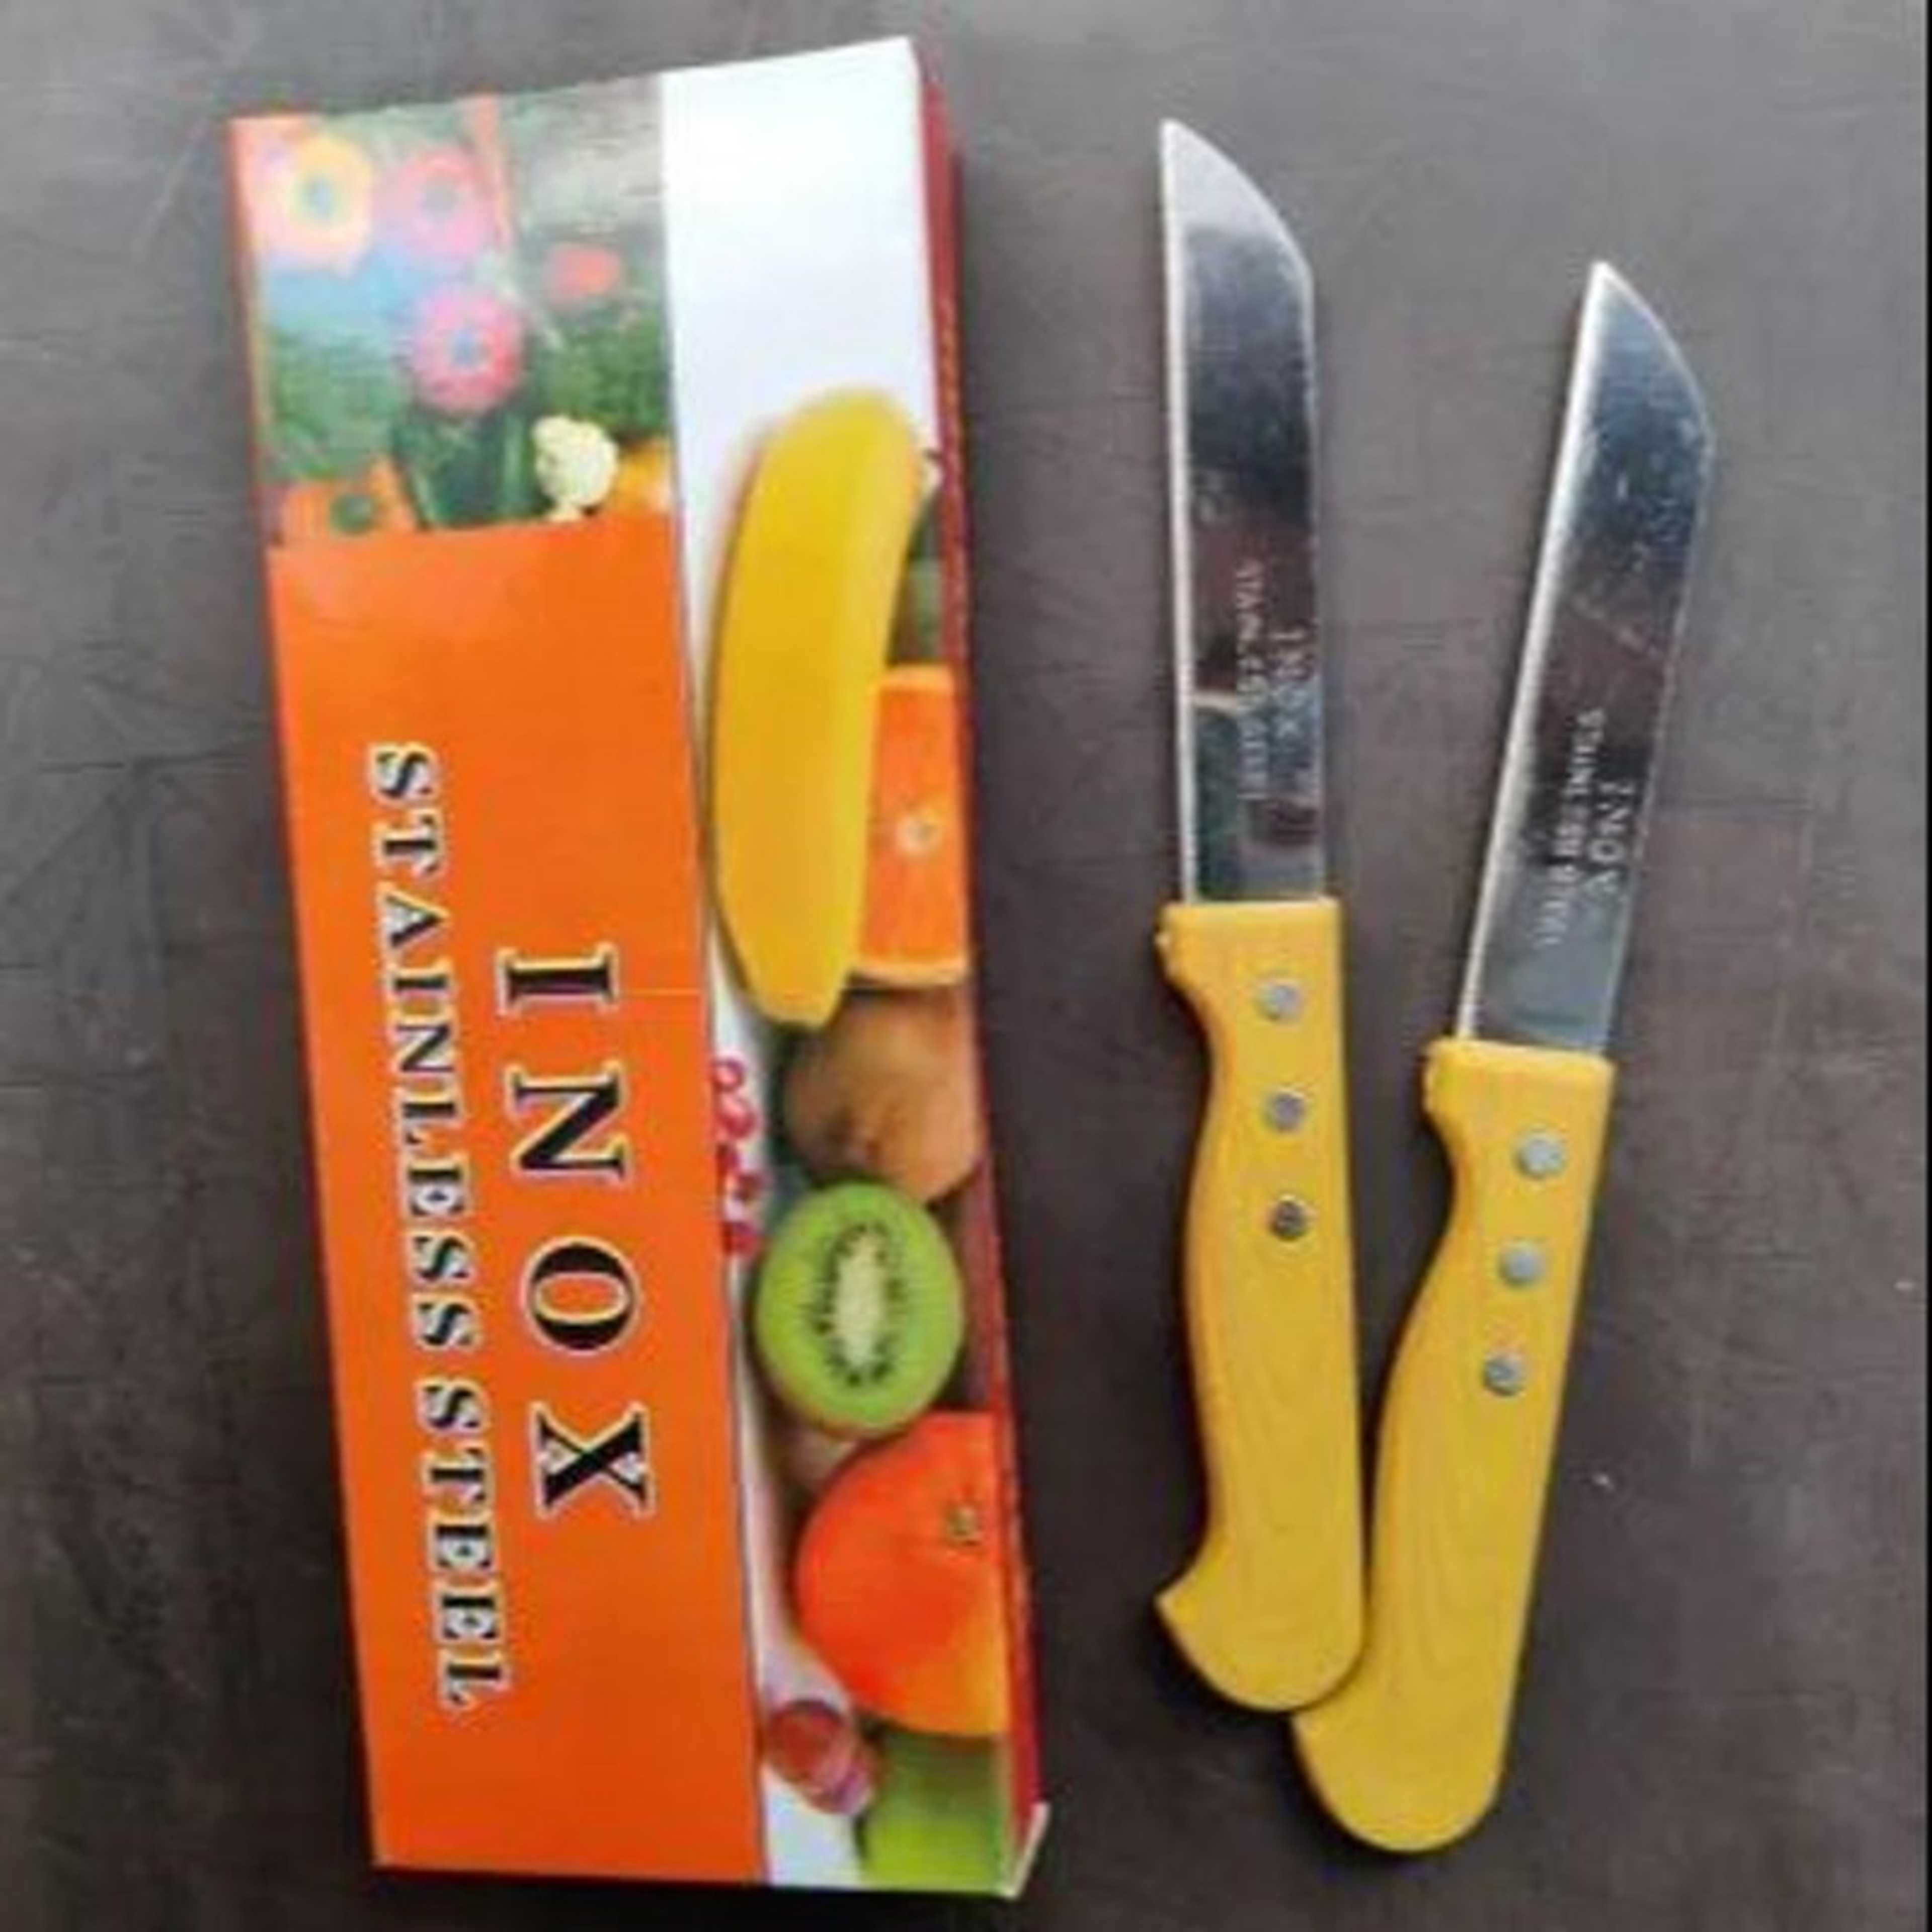 Kichen Knife (1Pcs,)  Ultra Sharp Stainless Steel Blade. For Fruits, Vegitables and other puroses.